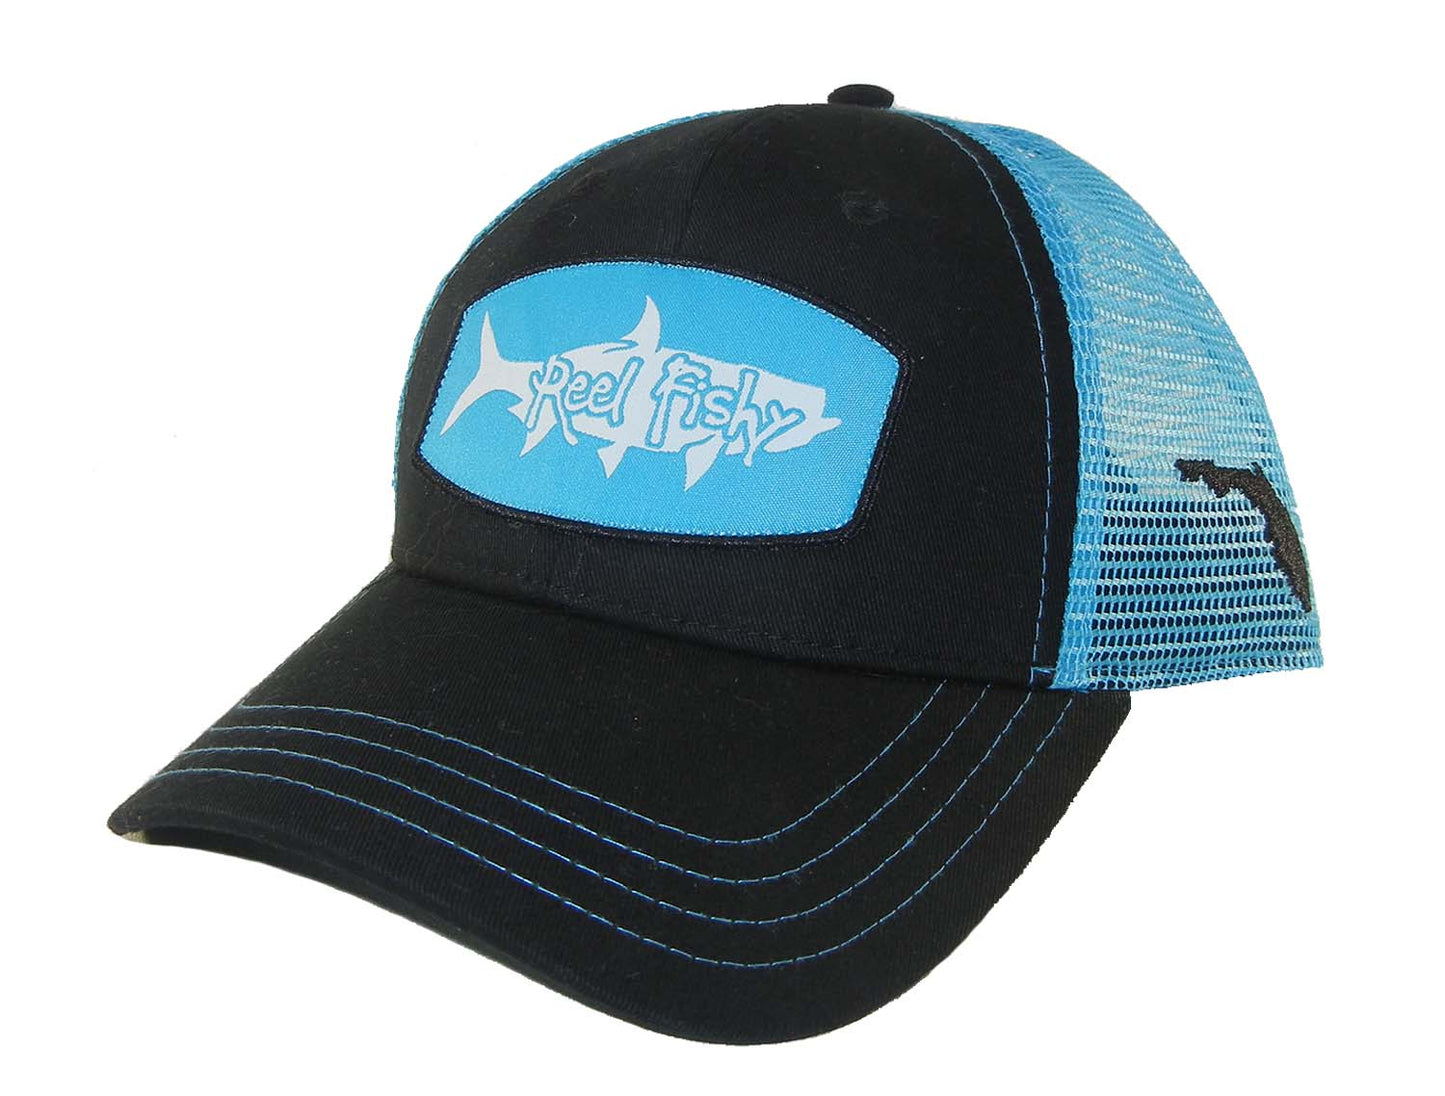 Tarpon Fishing Patch Trucker Hats with State of Florida Logo -*5 Colors! Black W/Aqua Patch